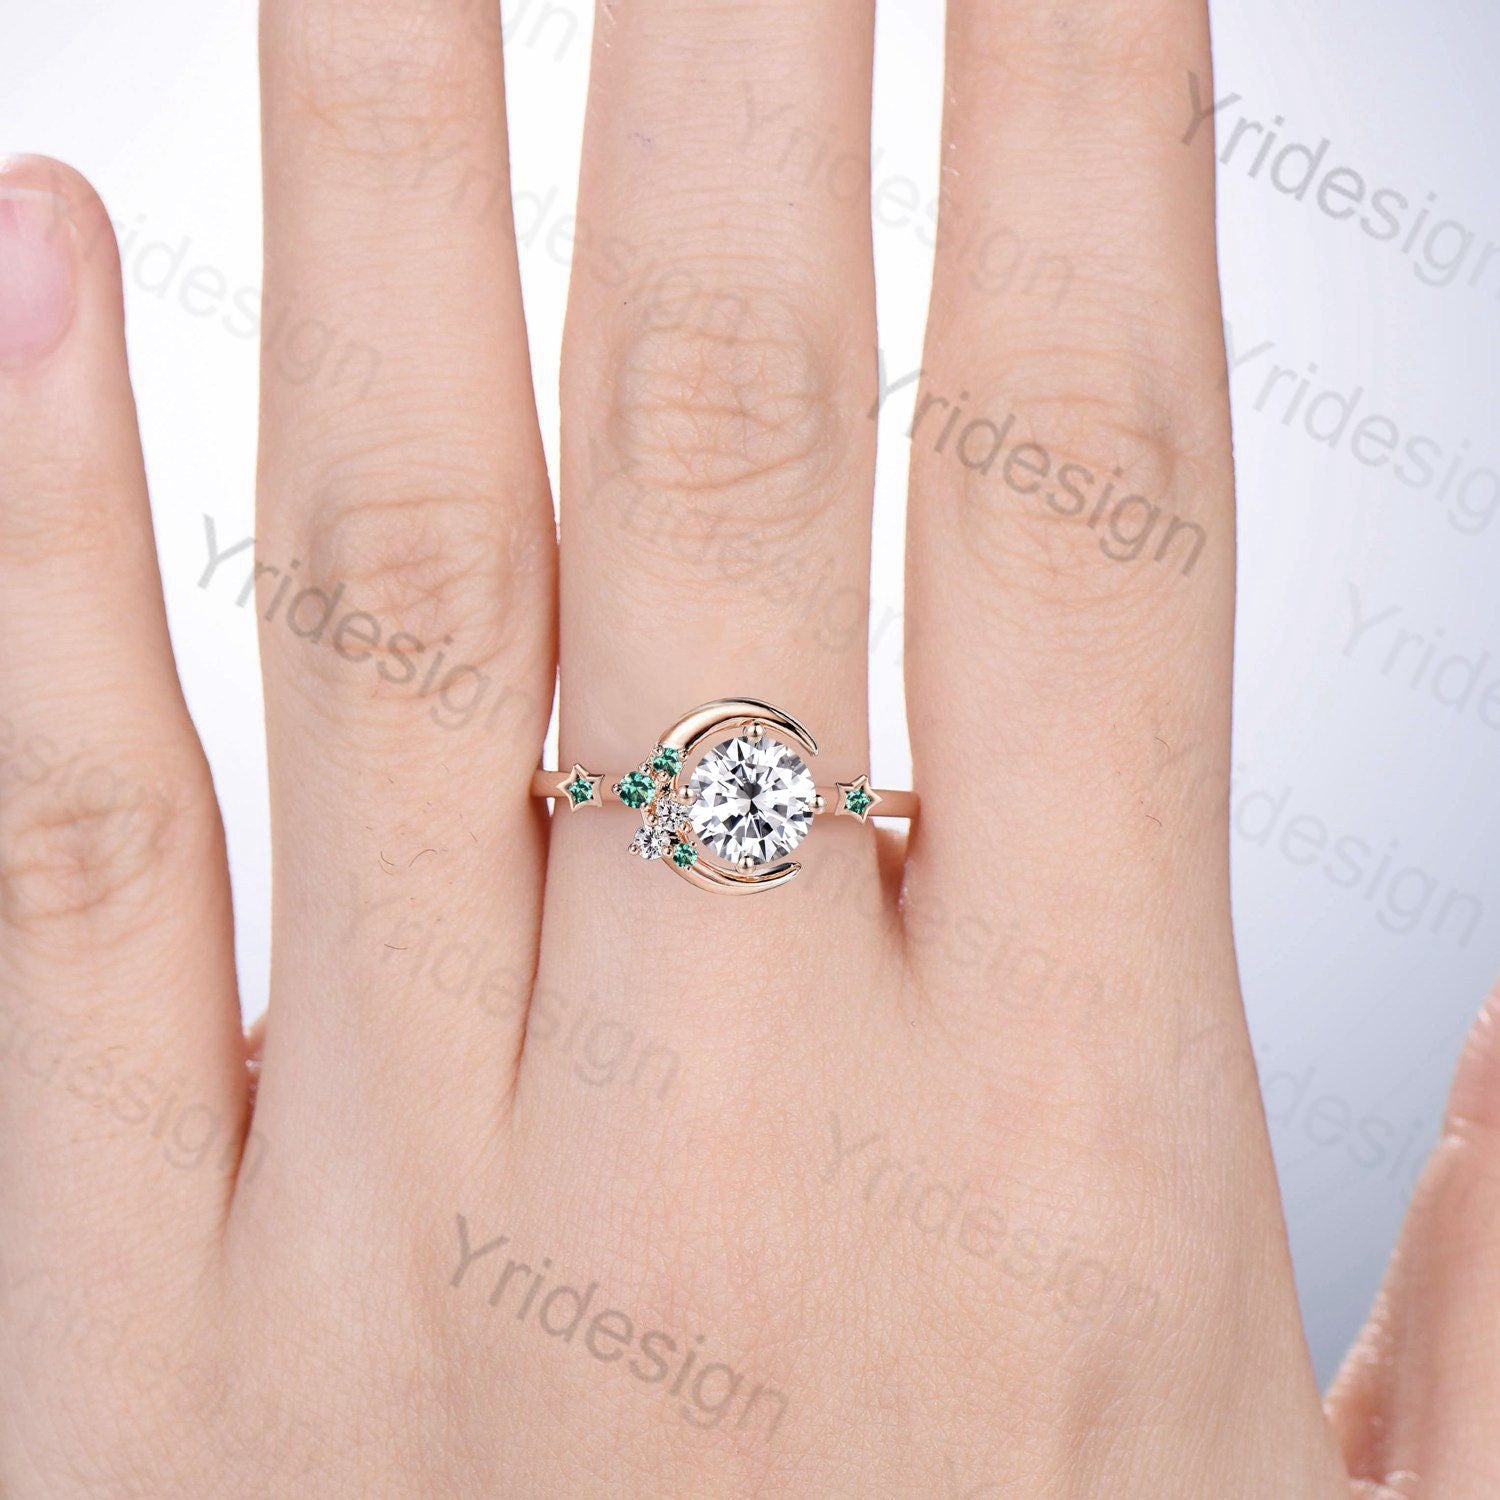 Vintage Crescent moon Moissanite Engagement Ring For Women Unique Cluster Star Galaxy moissanite wedding ring celestial anniversary gift - PENFINE